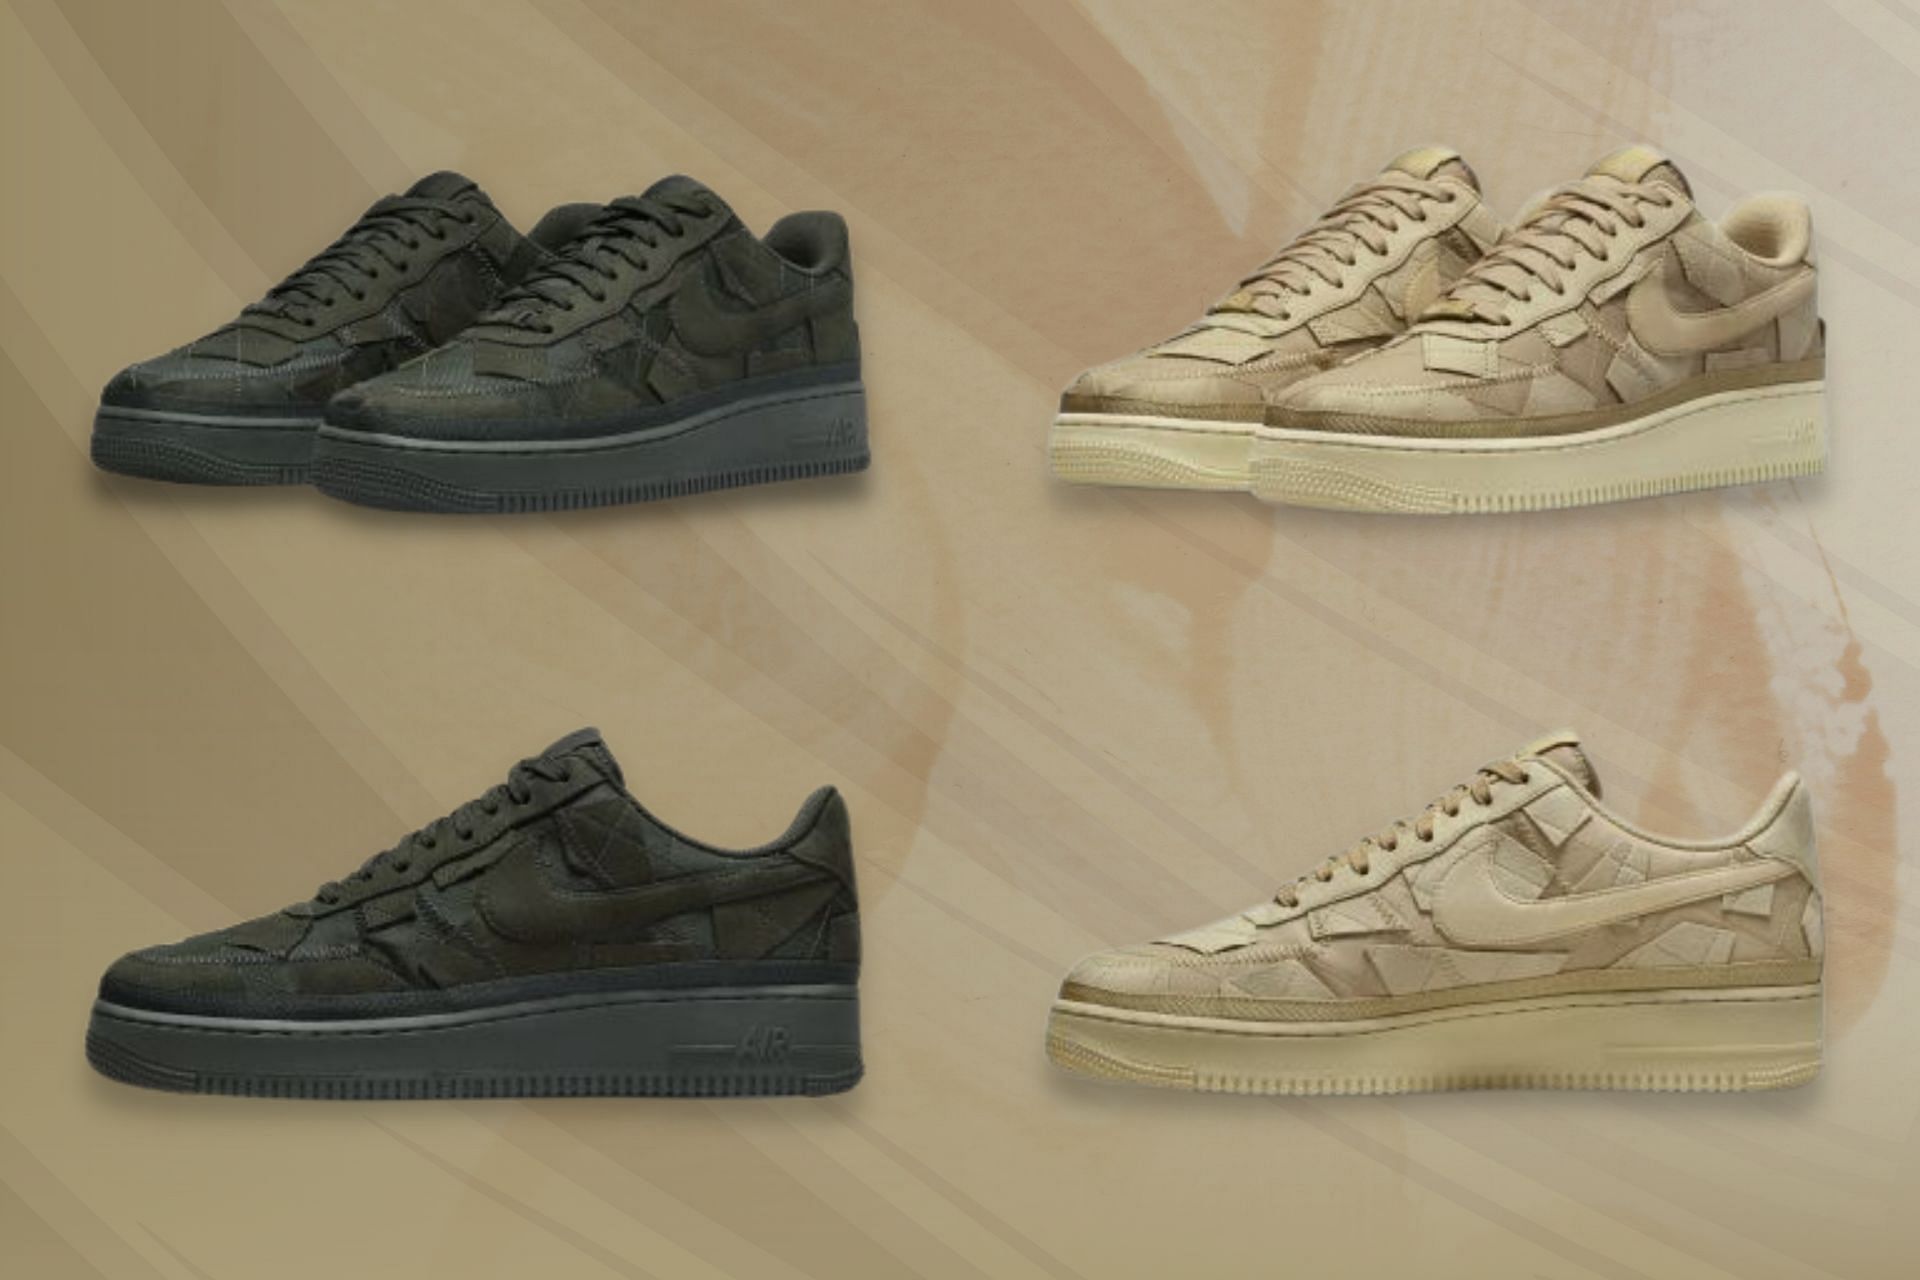 The upcoming Nike x Billie Air Force 1 Low footwear pack featuring &quot;Mushroom&quot; and &quot;Sequoia&quot; colorways constructed with recycled content (Image via Sportskeeda)